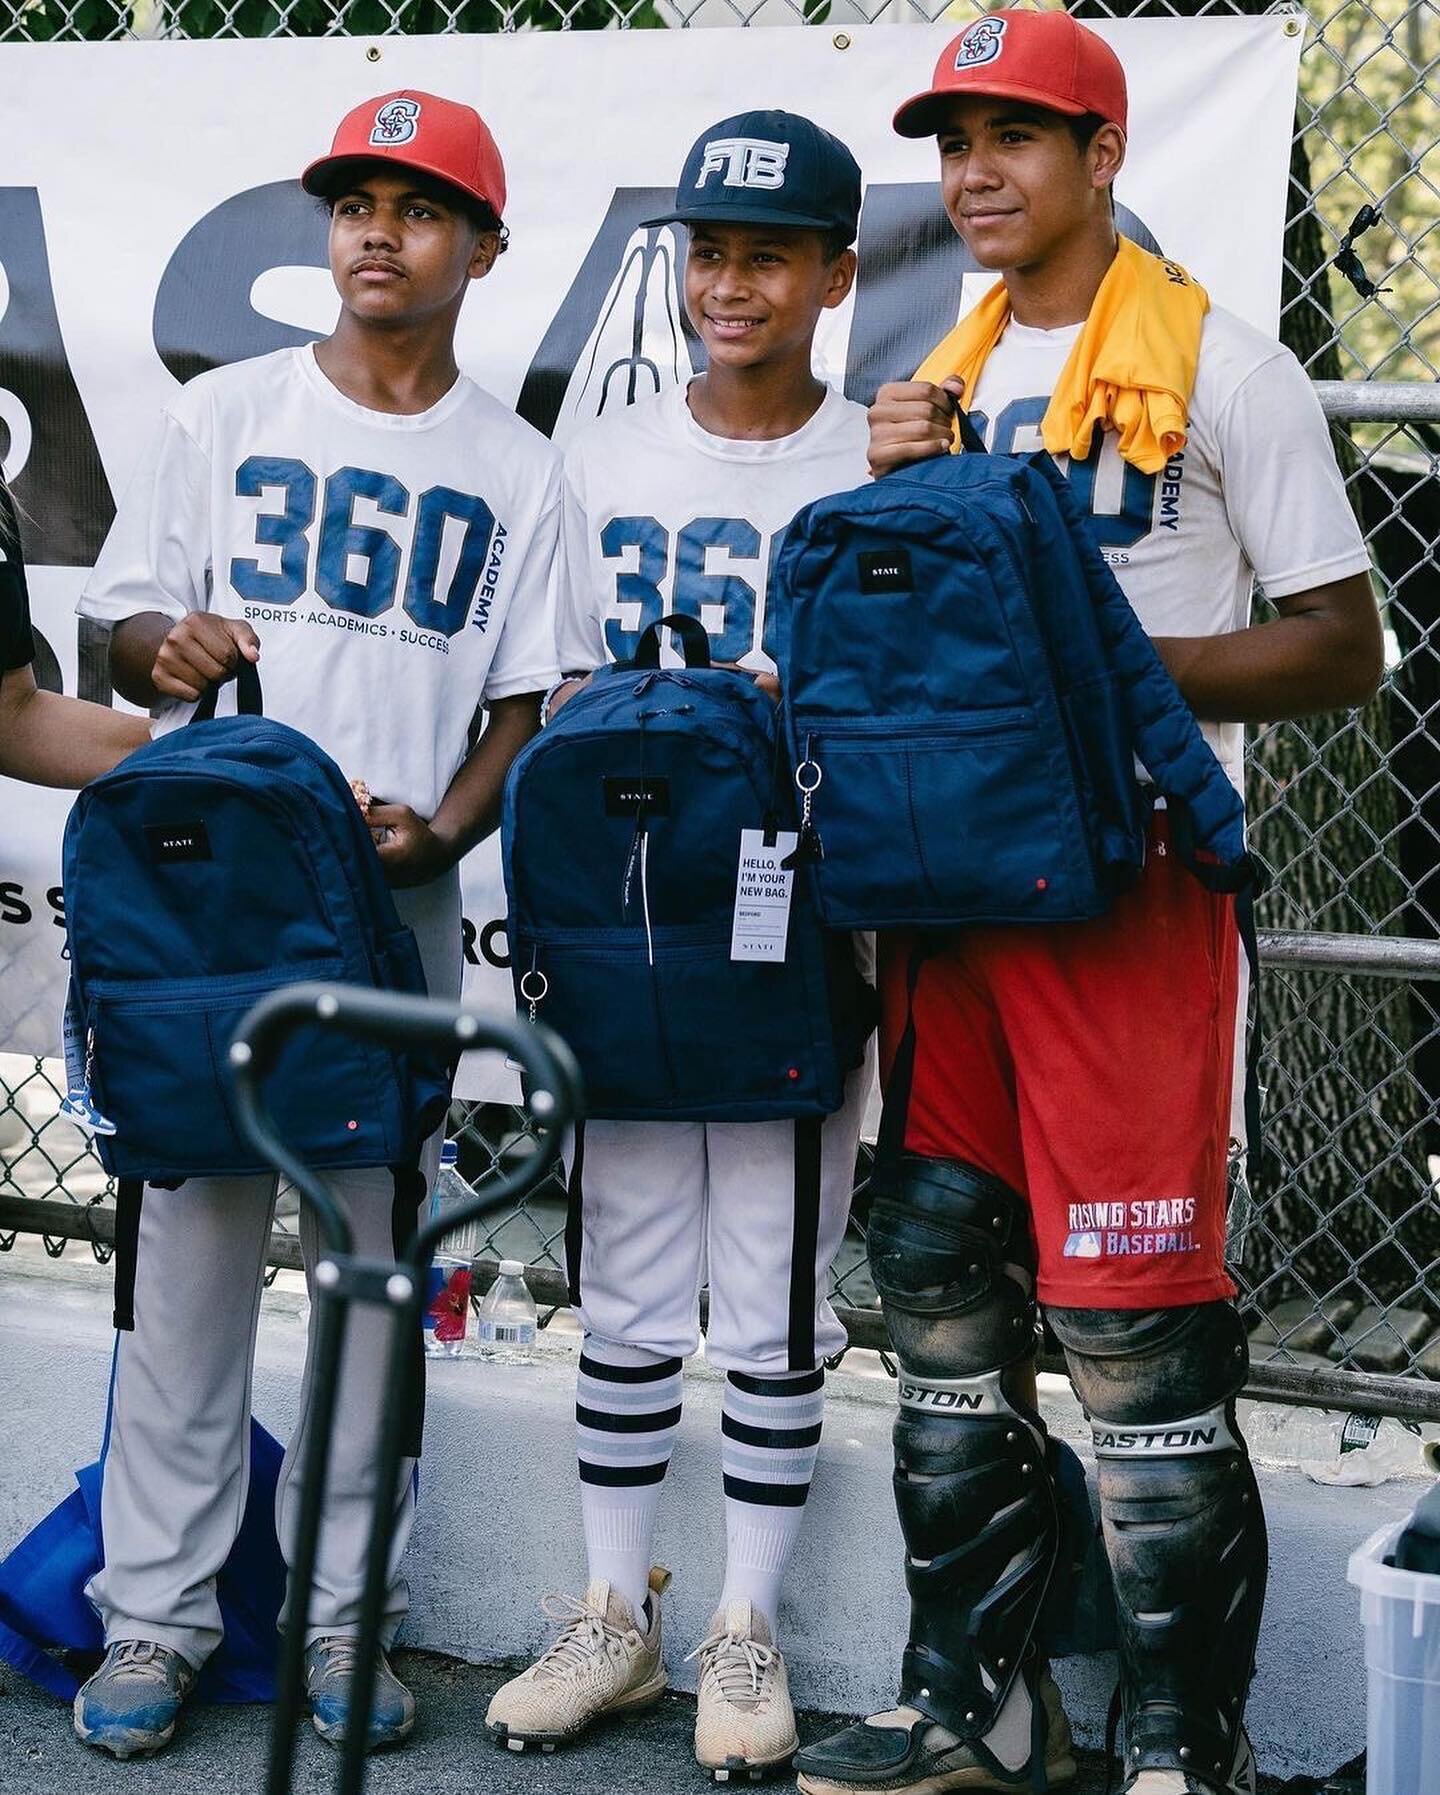 Repost from @getsquire &mdash; Thank you to the @asapfoundation for having us be a part of the Back to School Drive and Baseball Tournament! 

Kids received free backpacks, school supplies, food and haircuts. 🙏🏼 

This community is forever. 

@asap